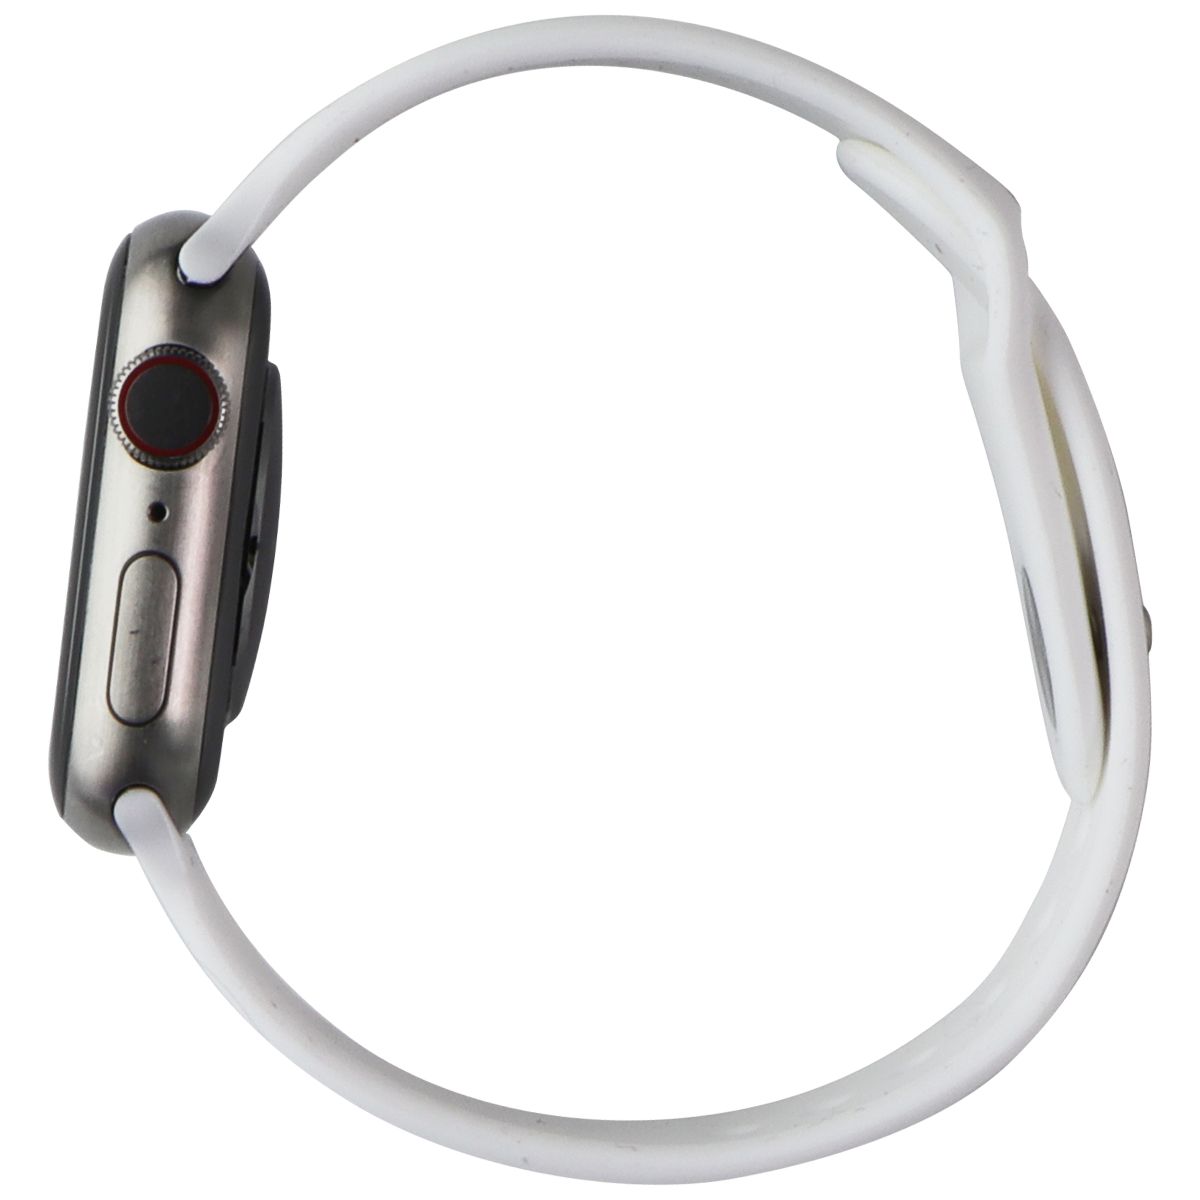 Apple Watch Series 7 (GPS + LTE) A2476 (41mm) Titanium / White Sp Band Smart Watches Apple    - Simple Cell Bulk Wholesale Pricing - USA Seller